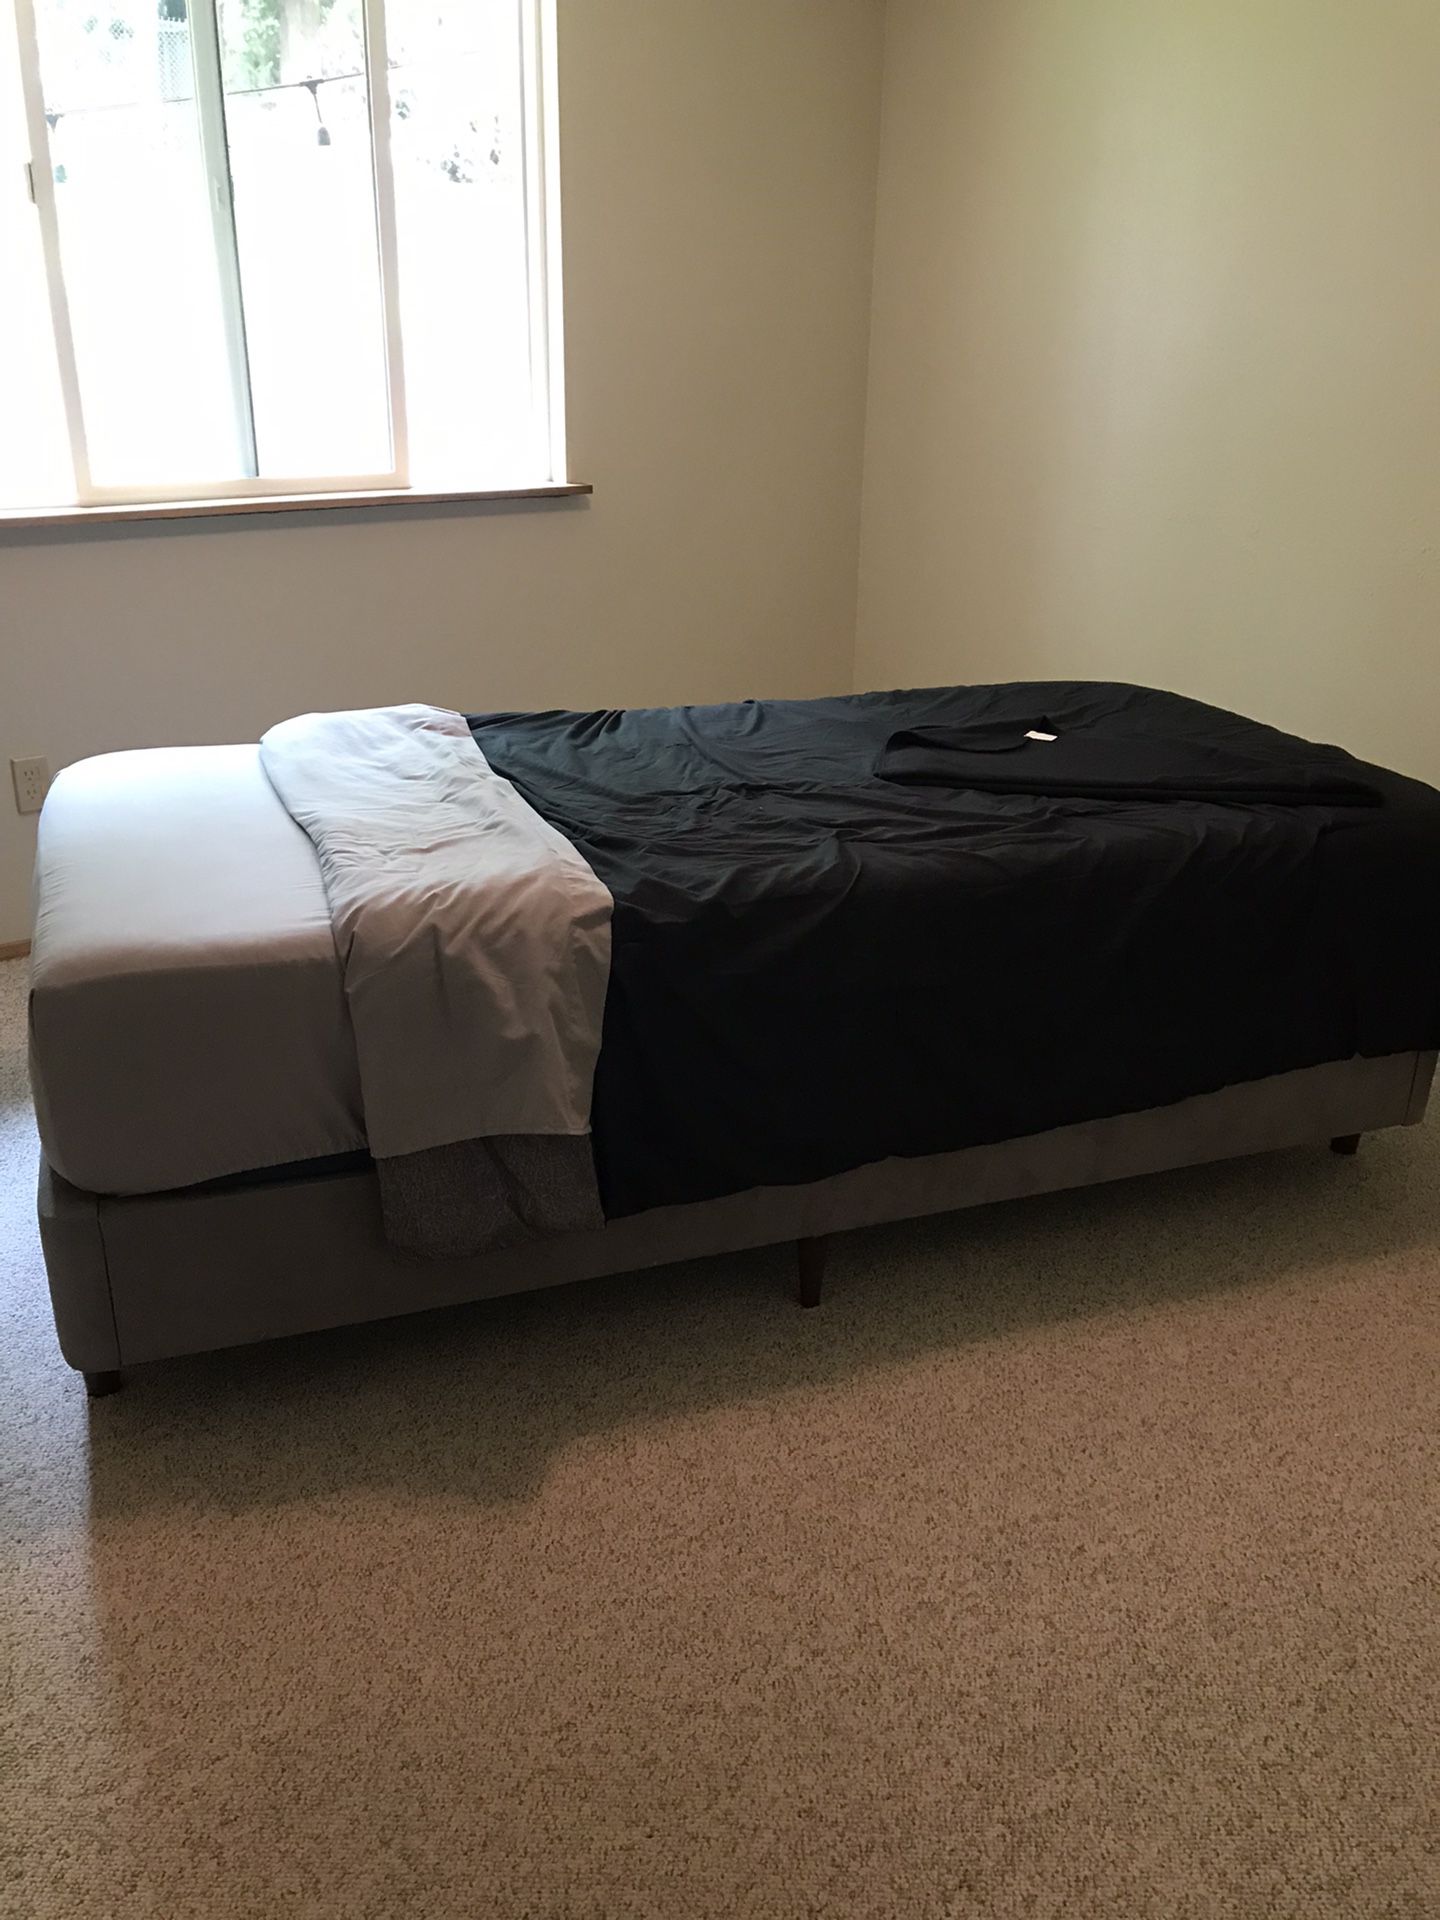 Used Twin XL Bed In A Box w/Base & Bedding/Mattress Pad